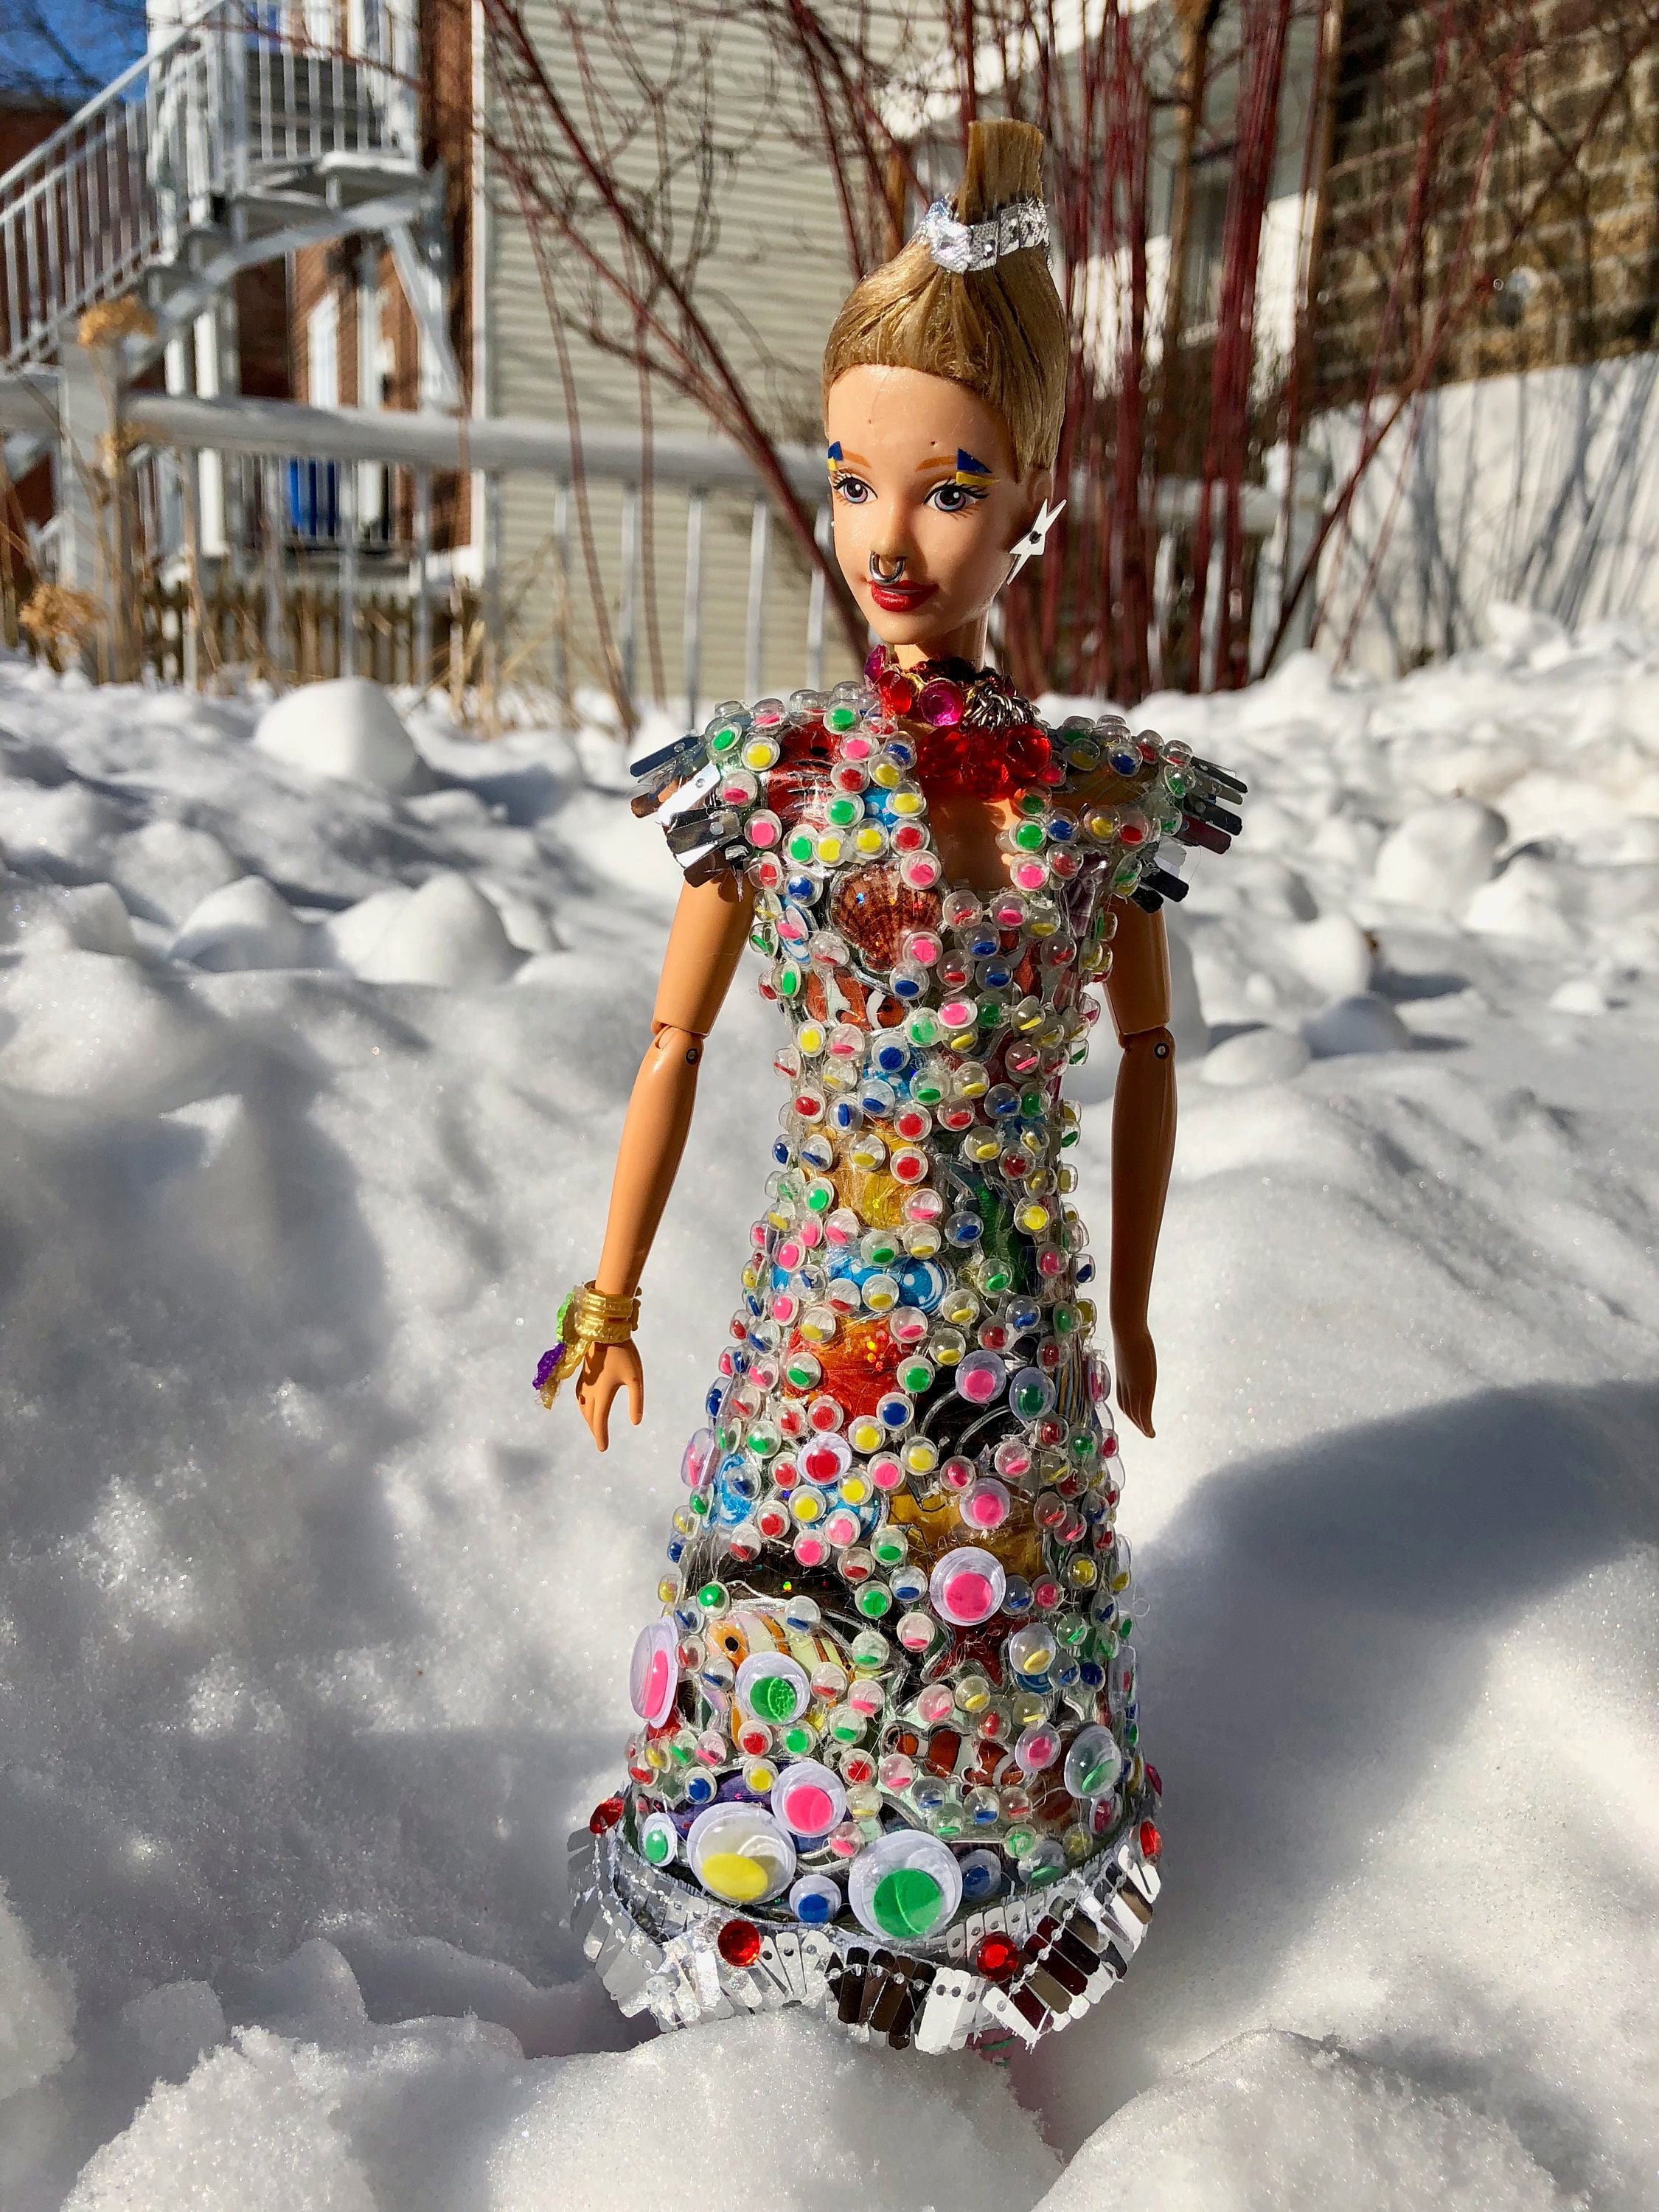 Barbie Clothes: How life in plastic can be fantastic, Dress to Impress